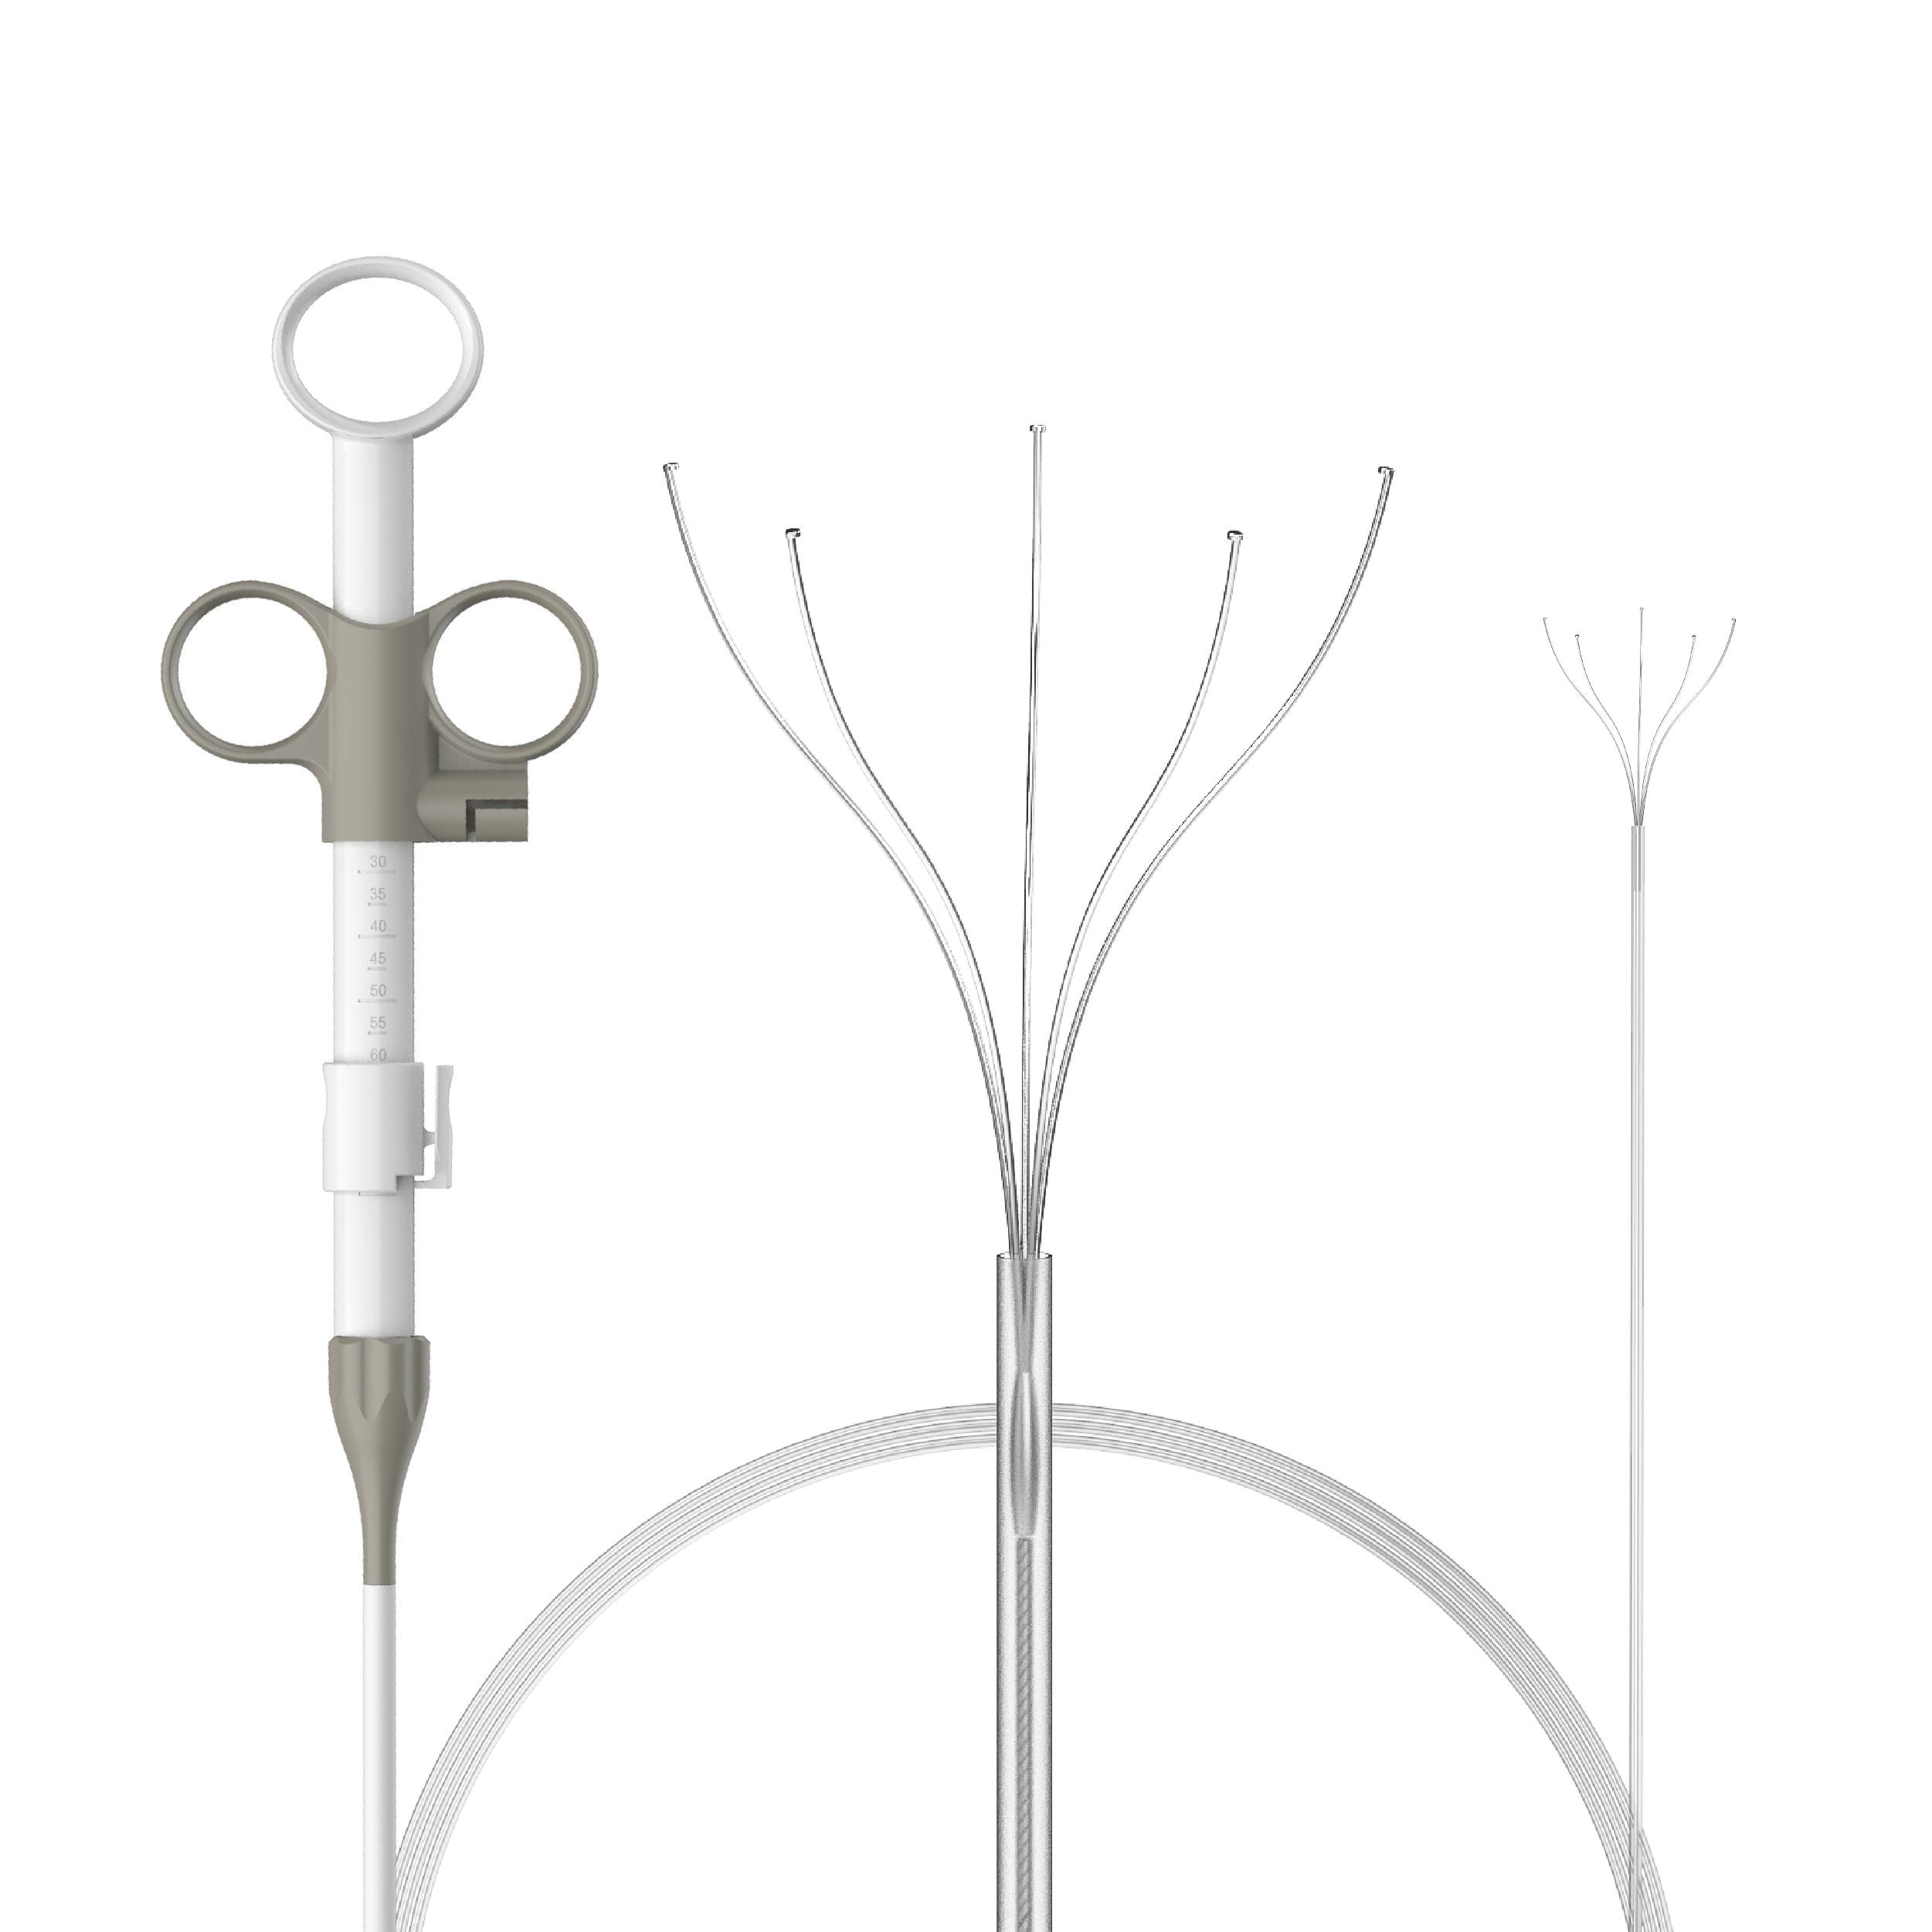 disposable grasping forceps